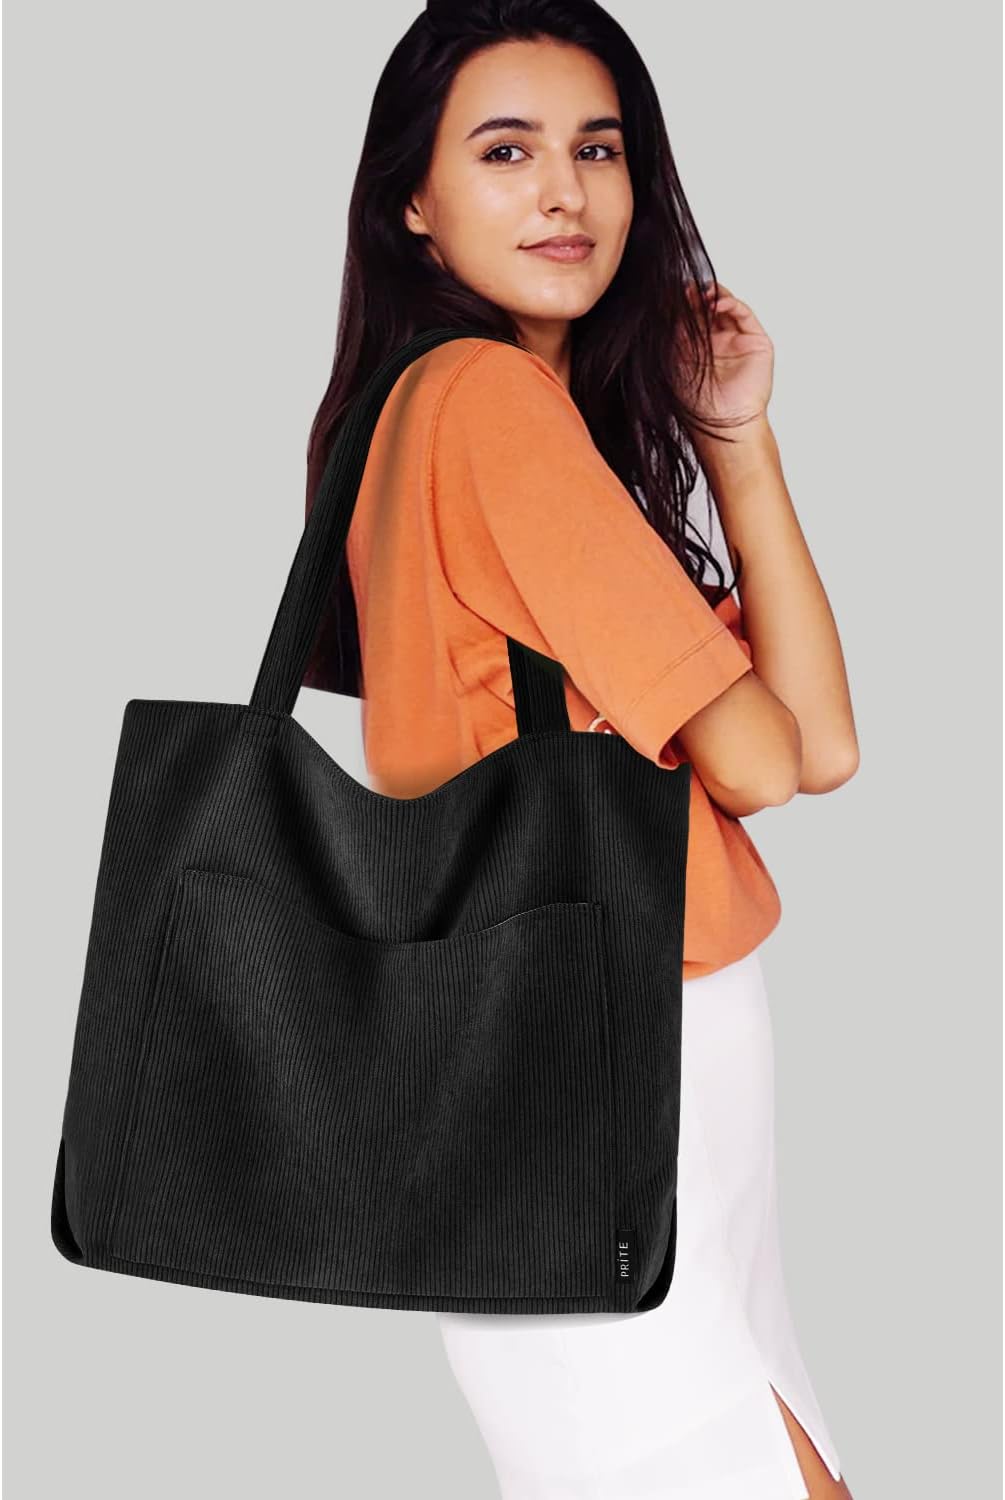 Large Corduroy Shoulder Tote Bag with Zipper and Pockets | GreenLifeHuman Emporium